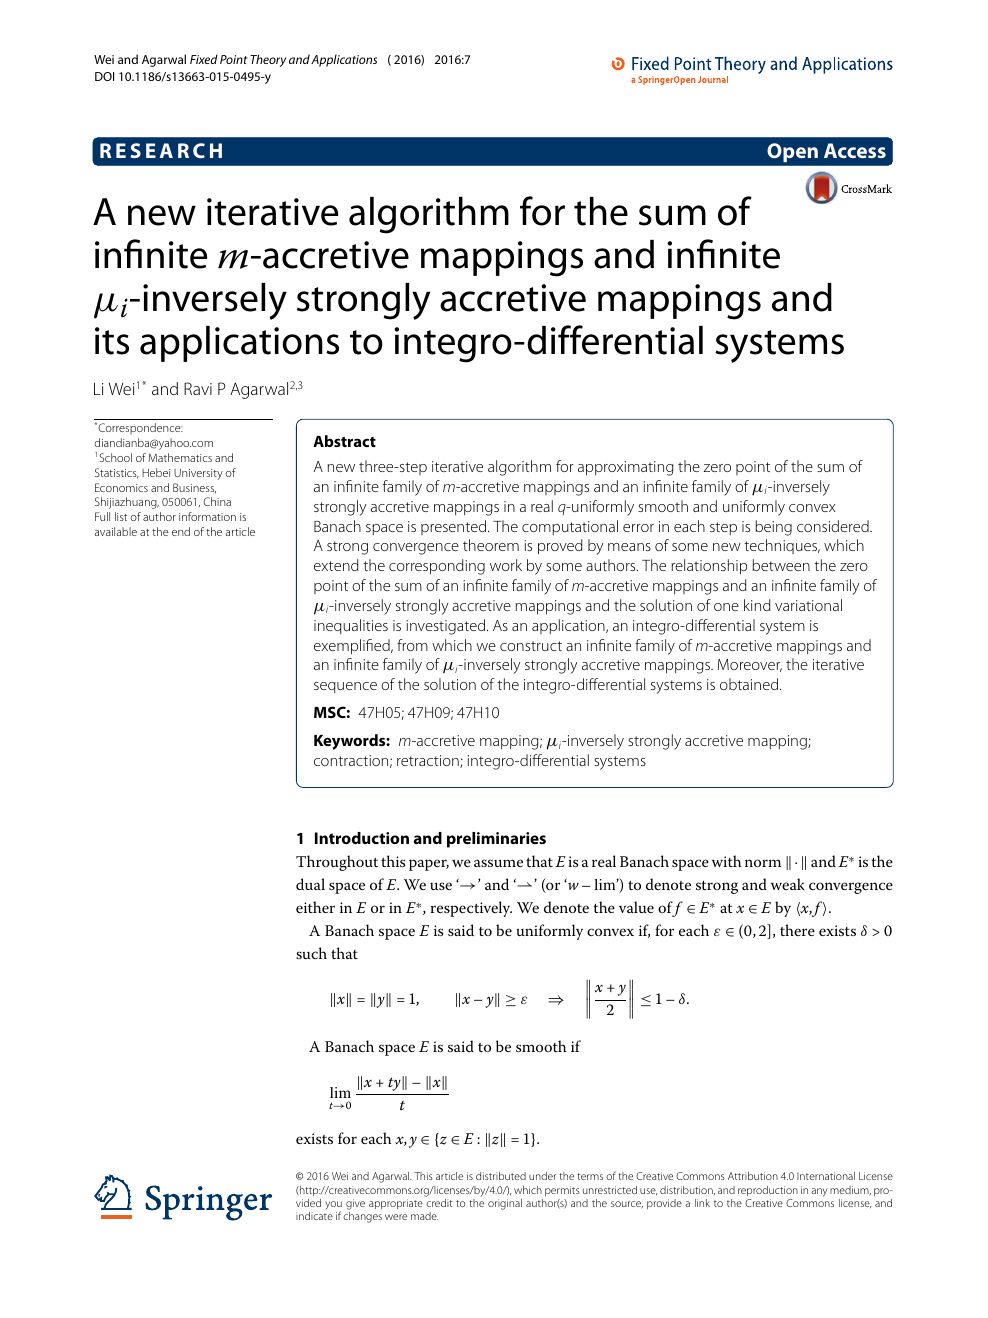 A New Iterative Algorithm For The Sum Of Infinite M Accretive Mappings And Infinite M I Mu I Inversely Strongly Accretive Mappings And Its Applications To Integro Differential Systems Topic Of Research Paper In